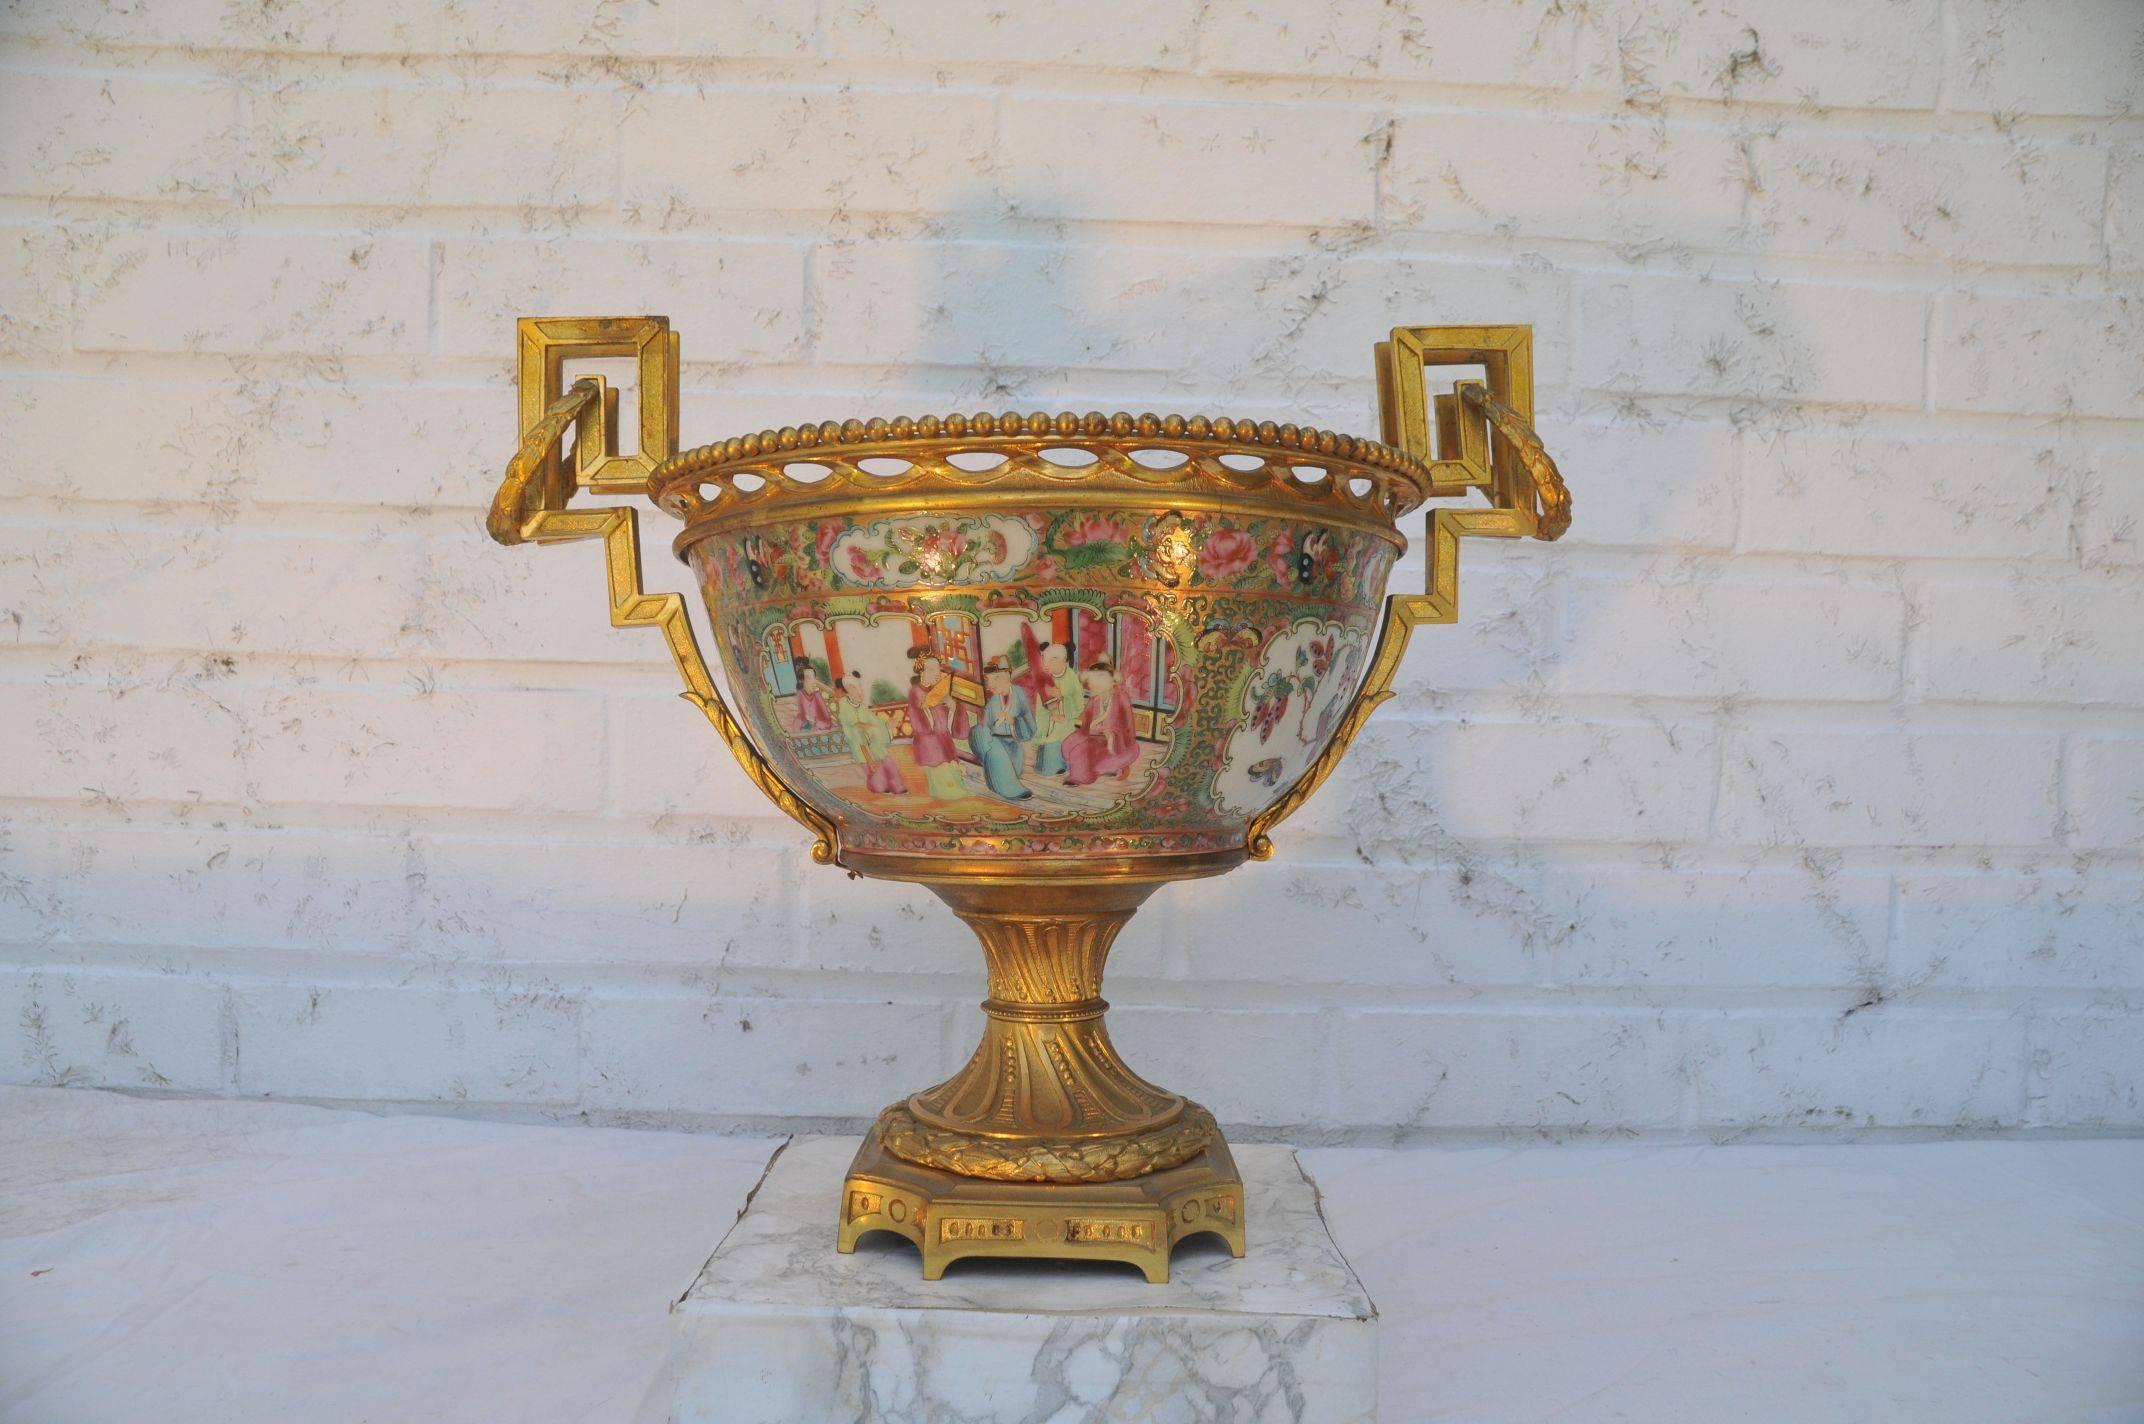 A fine canton ormolu-mounted garniture.
19th century.
Comprising a central bowl and two ormolu vases.
The bowl decorated in bright enamels with a central medallion surrounded by four shaped reserves of figures in an audience scene before a